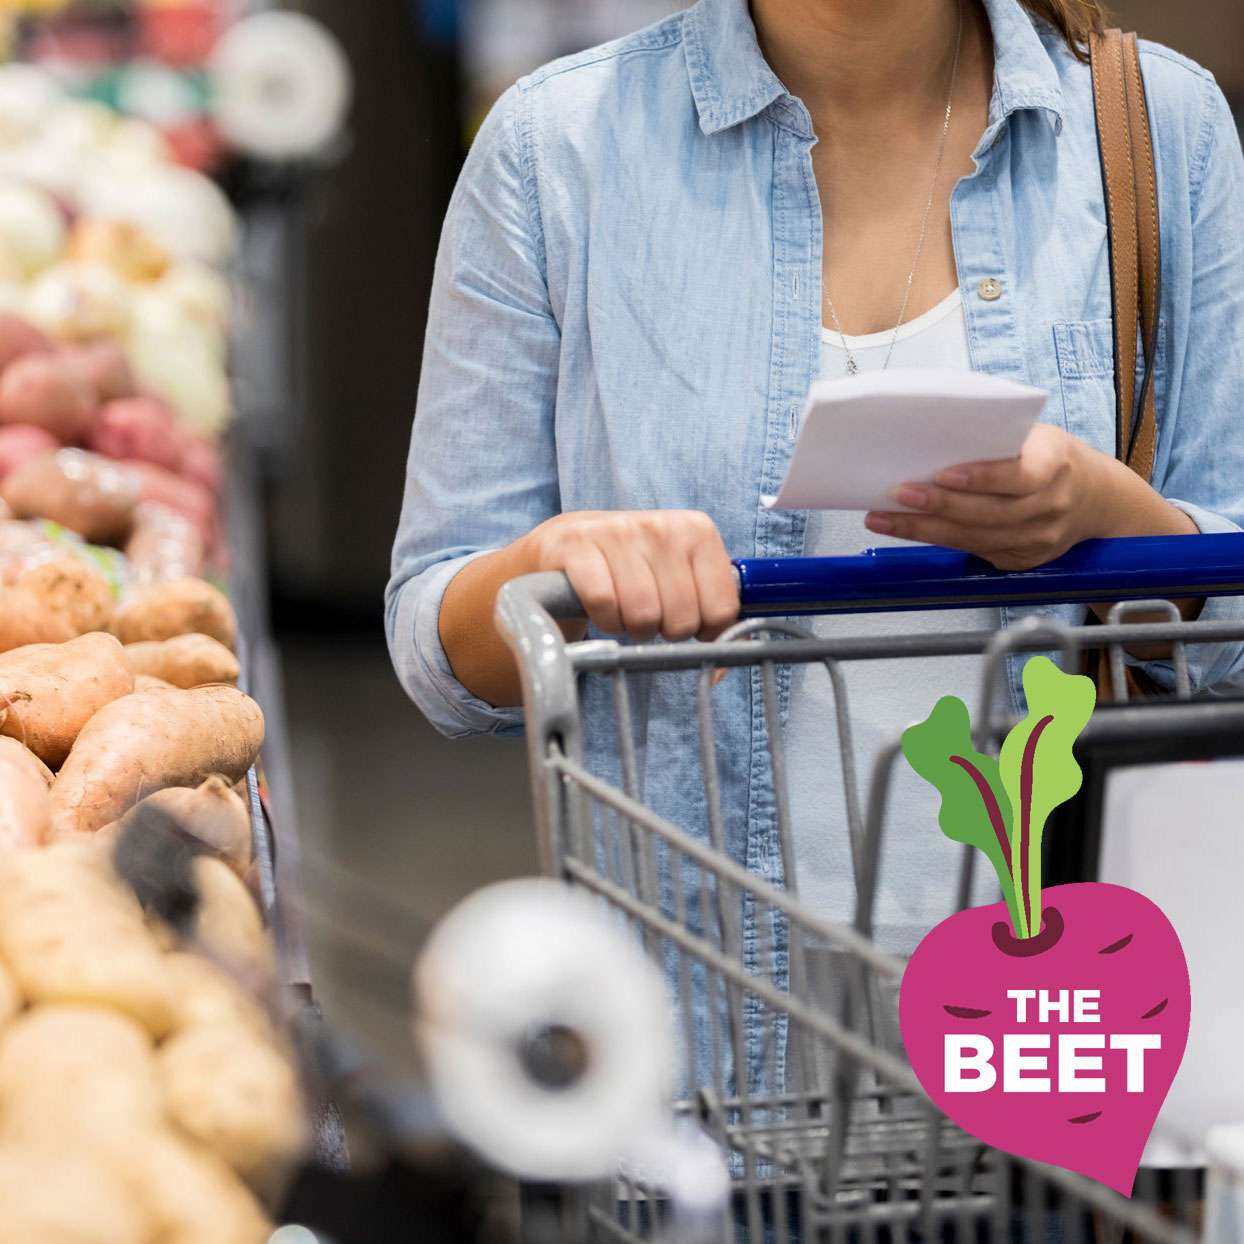 photo of a woman grocery shopping and "The Beet" logo